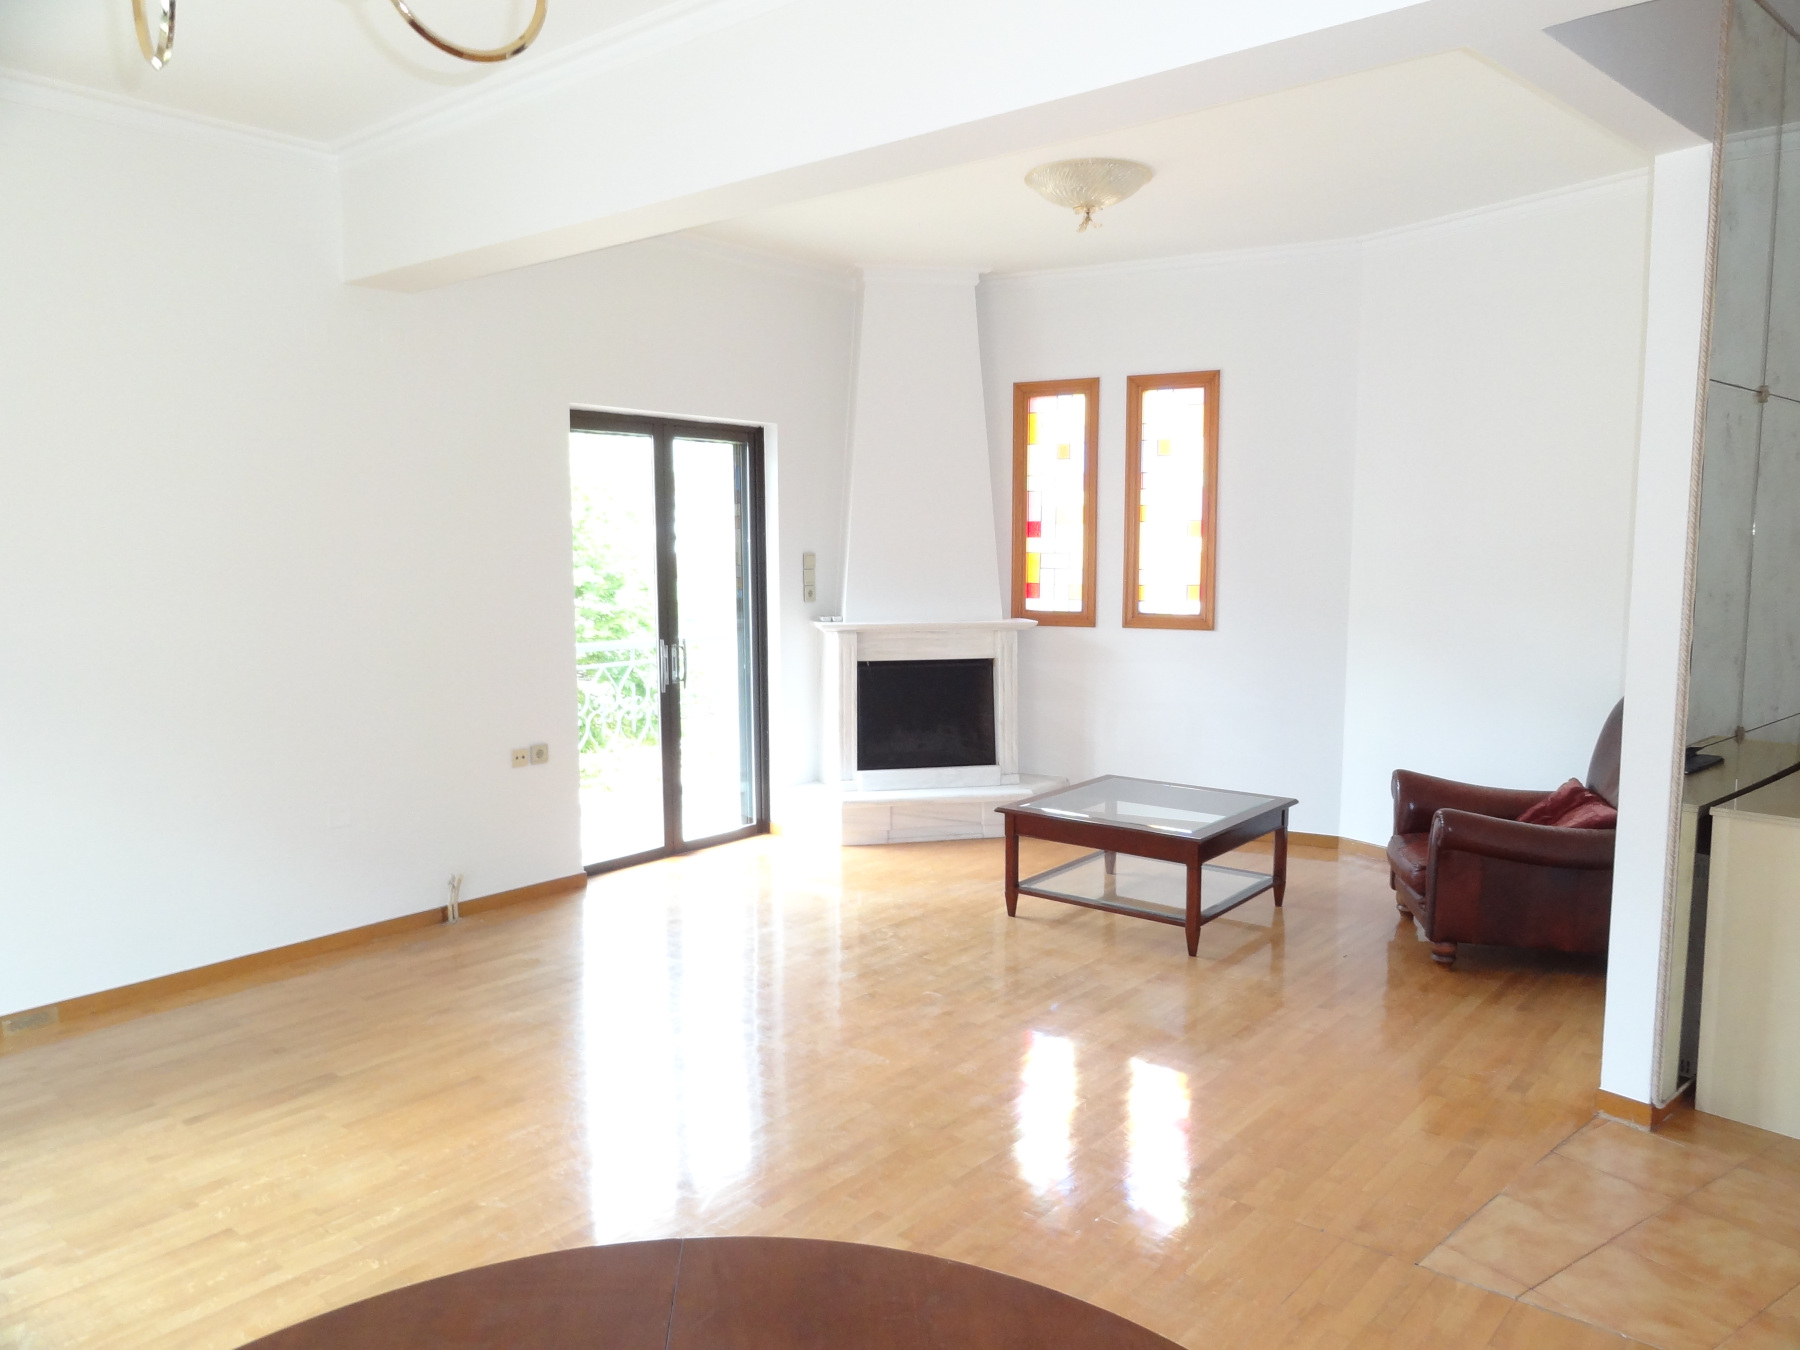 For rent 2 bedrooms floor apartment 105 sq.m. 1st floor in the center of Ioannina near the spiritual center